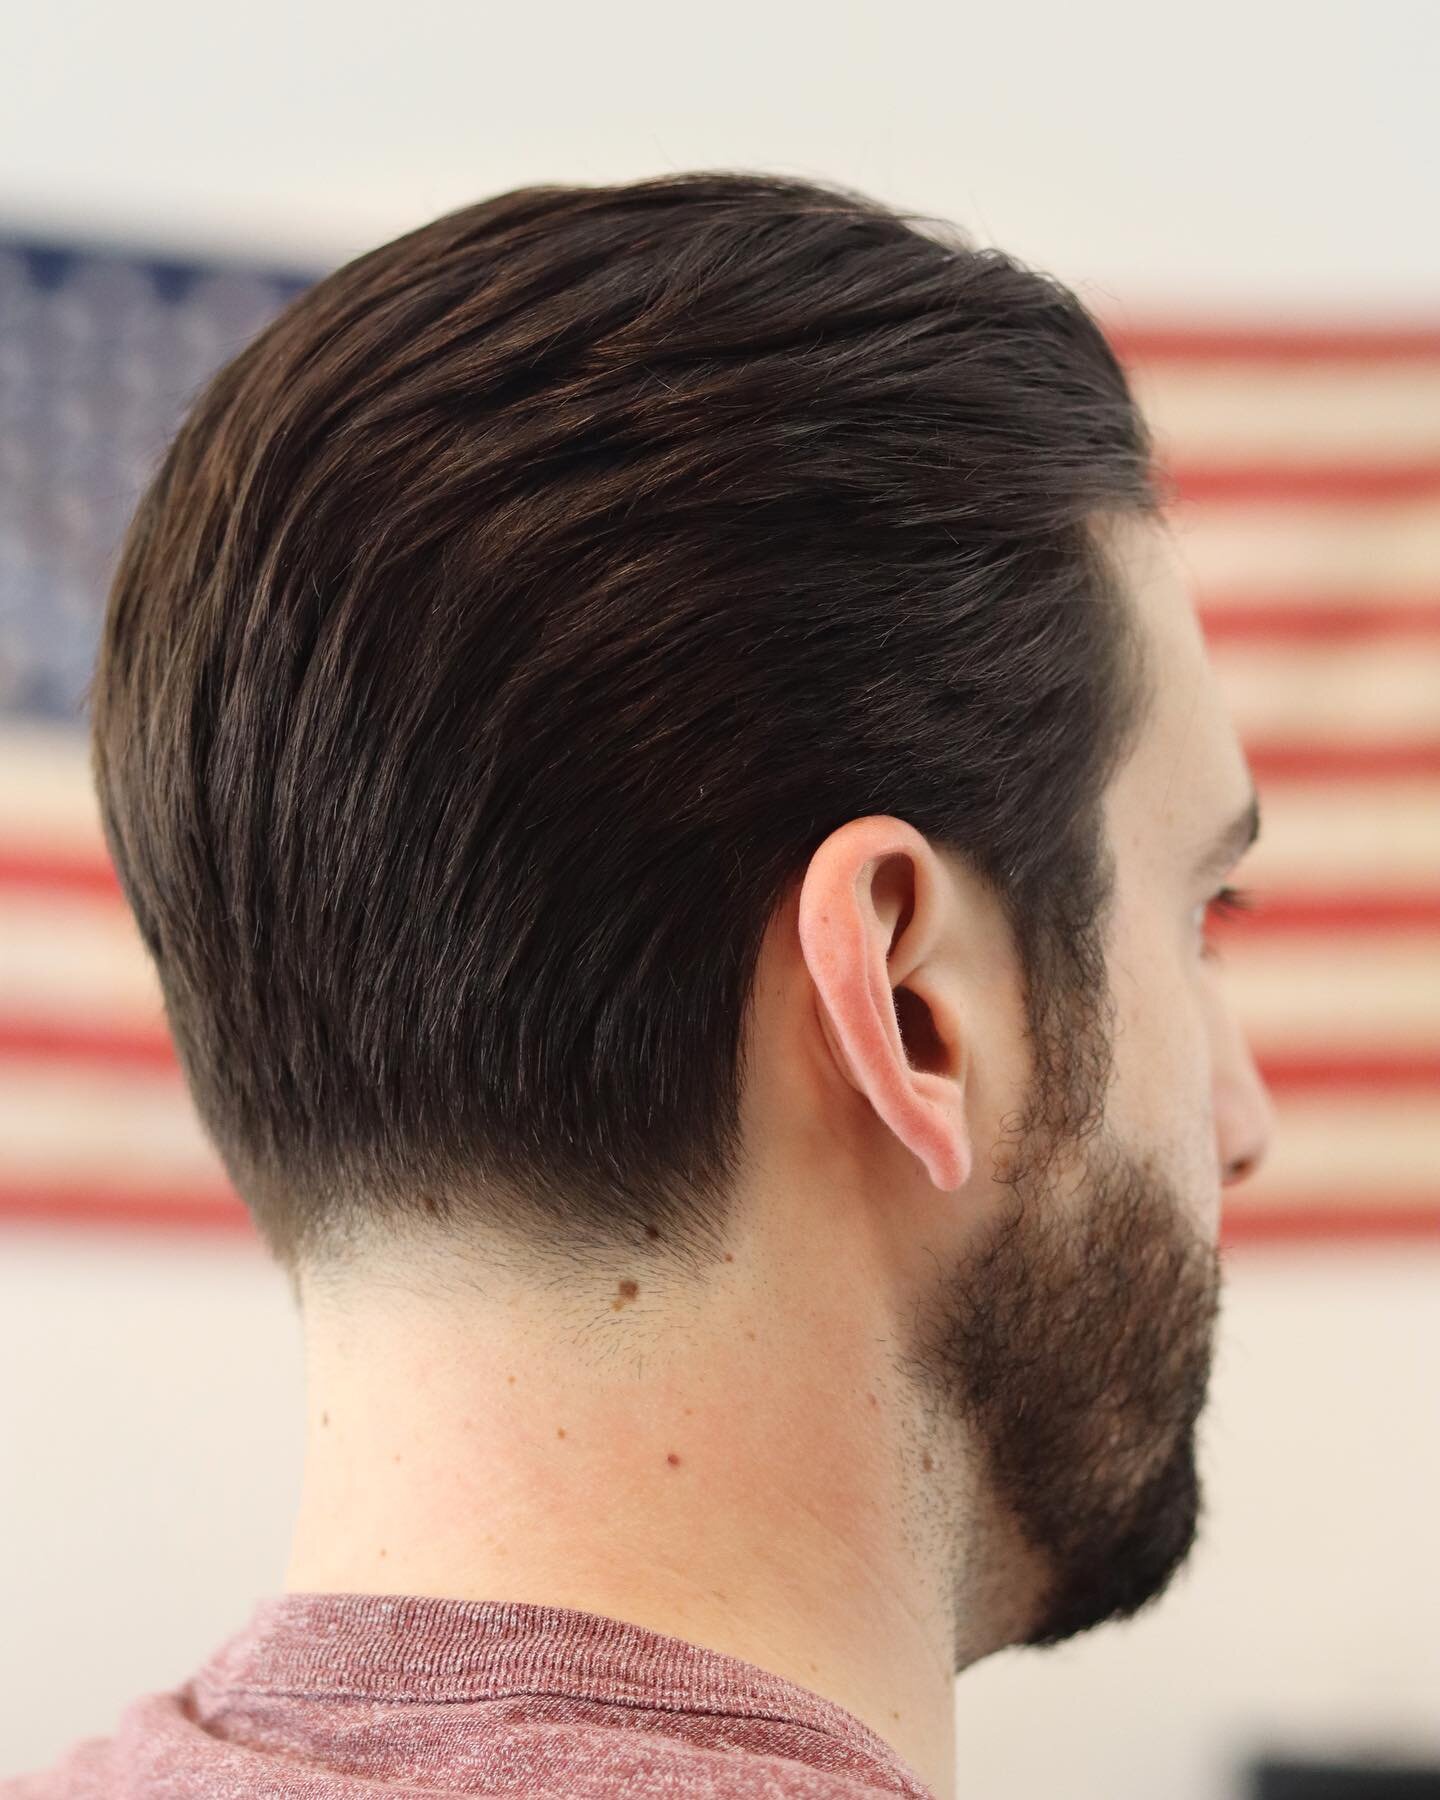 I think I could do this haircut all day everyday and not get tired of it&hellip; 🧐 an endless supply of Texture Cream by @themailroombarber would definitely help! 

#barber #philadelphia #wahlpro #classicsneverdie #taper #scissorcut #phillybarber #f